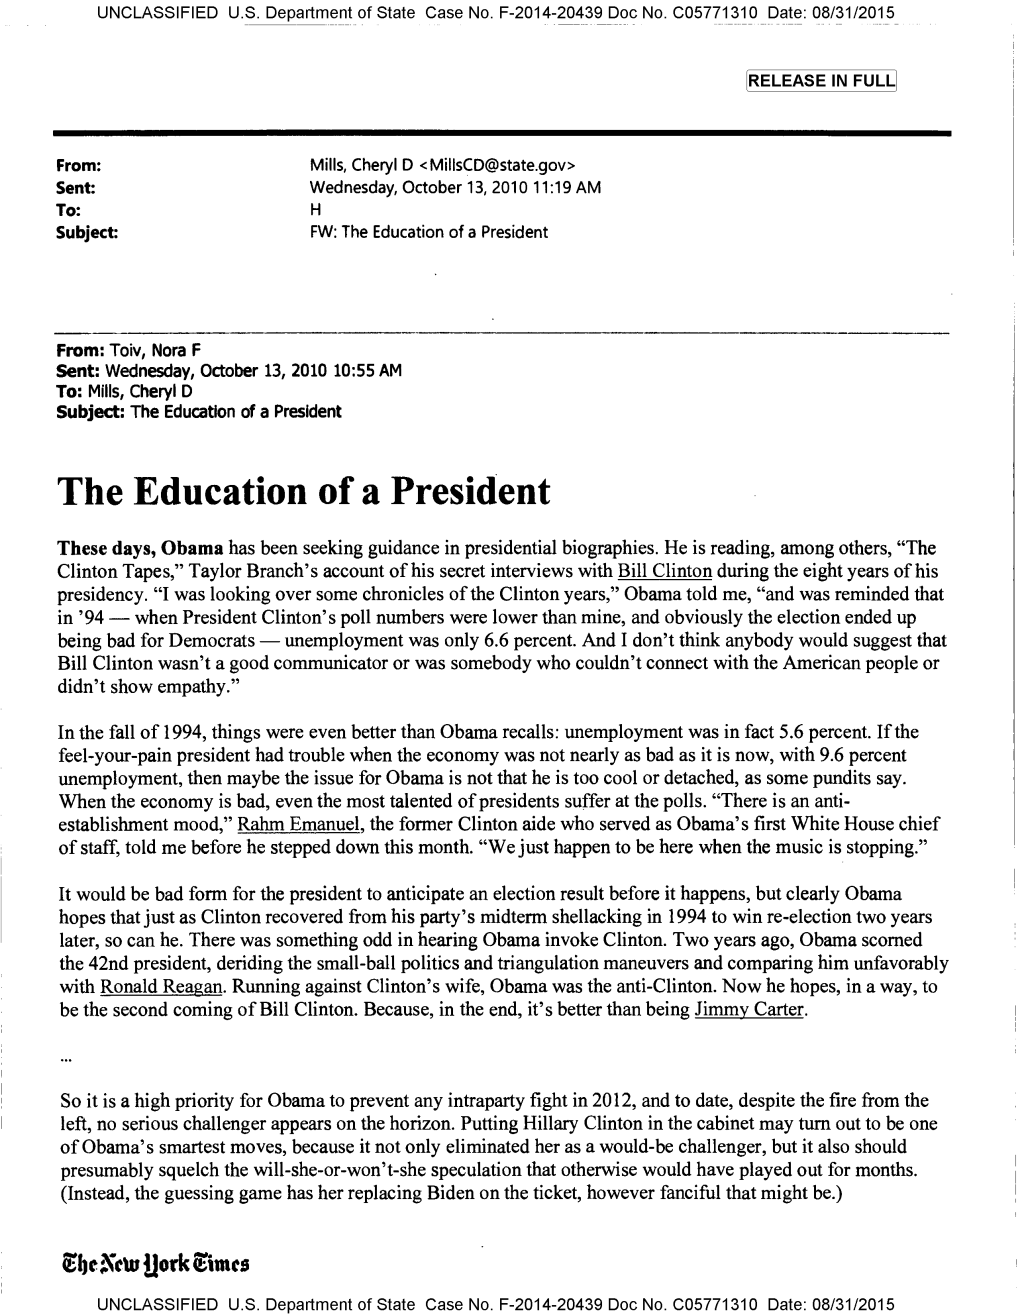 The Education of a President